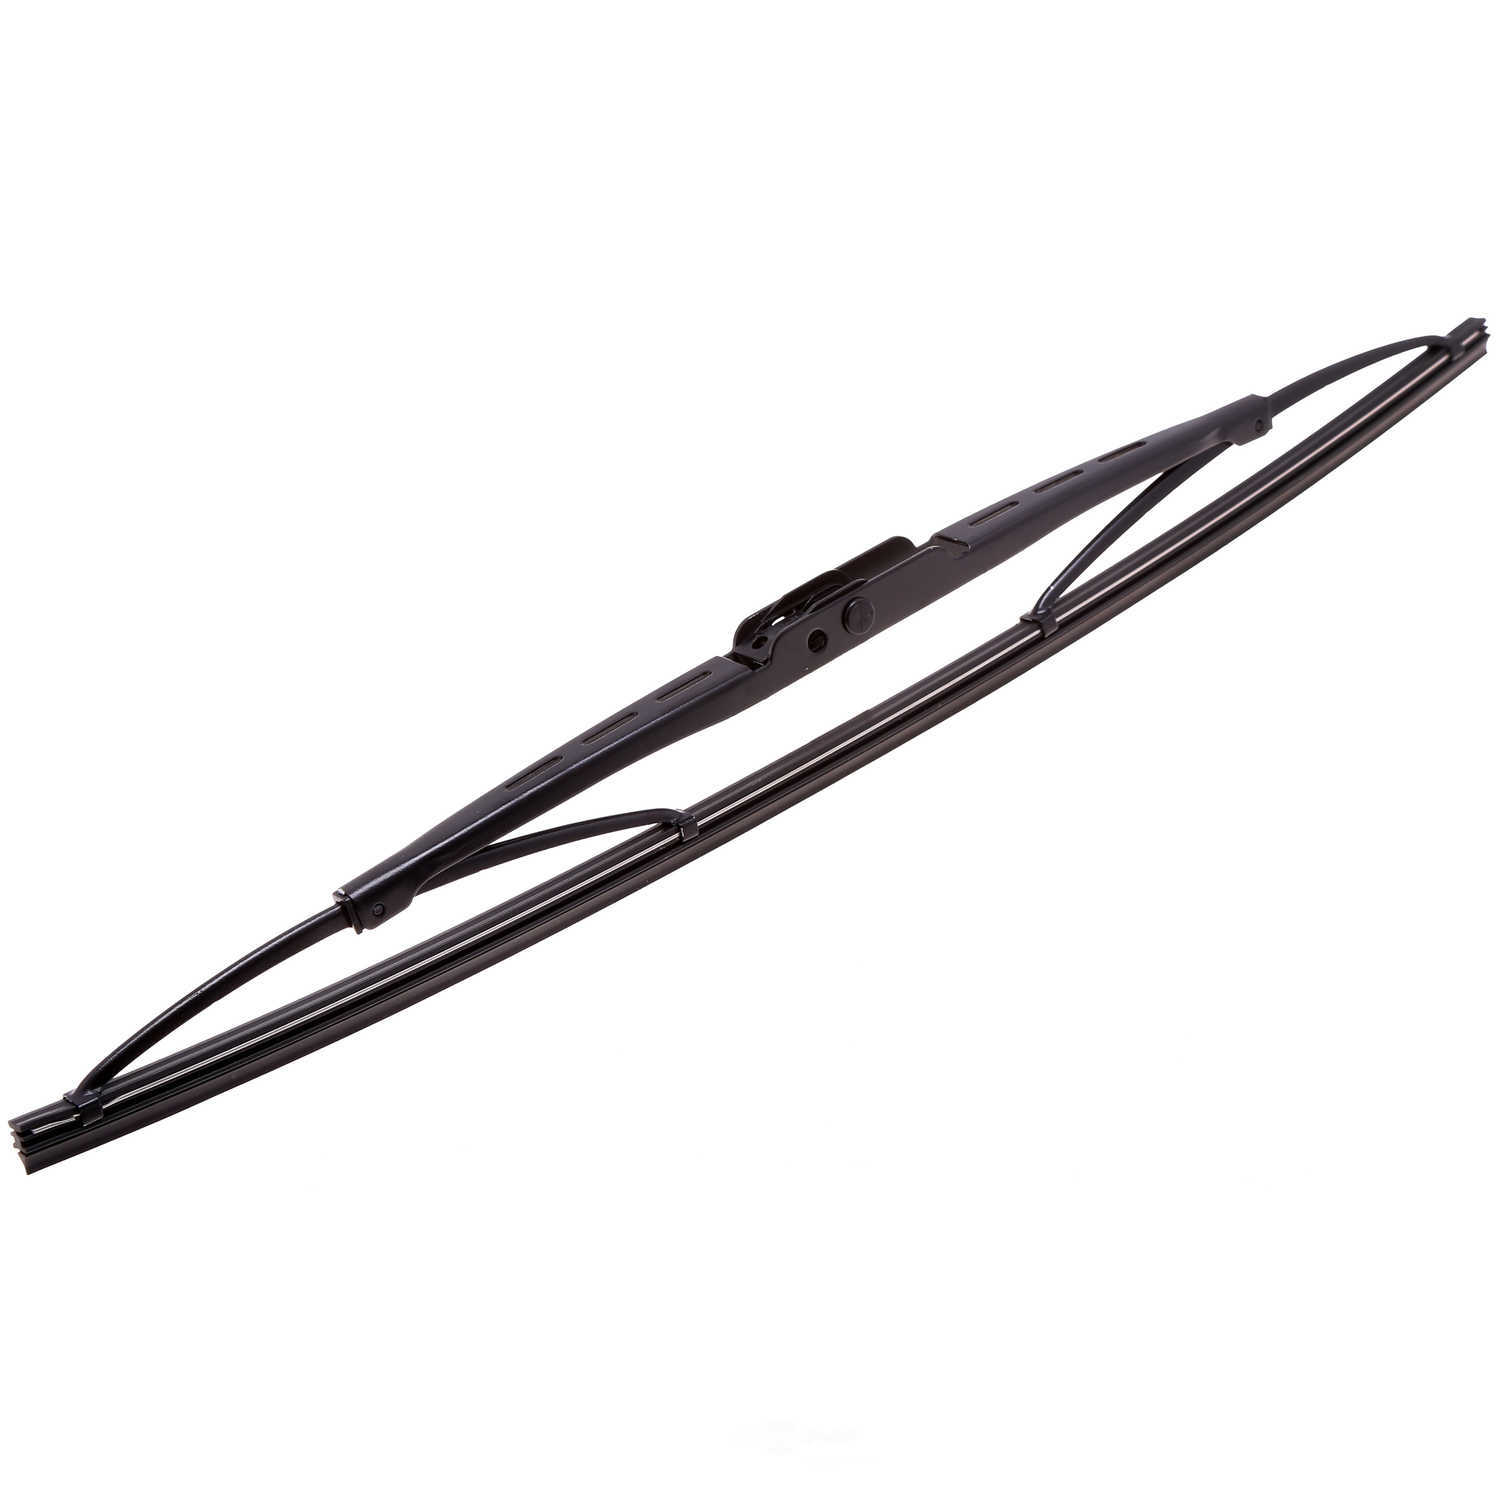 ANCO WIPER PRODUCTS - ANCO 31-Series Wiper Blade (Front Left) - ANC 31-16